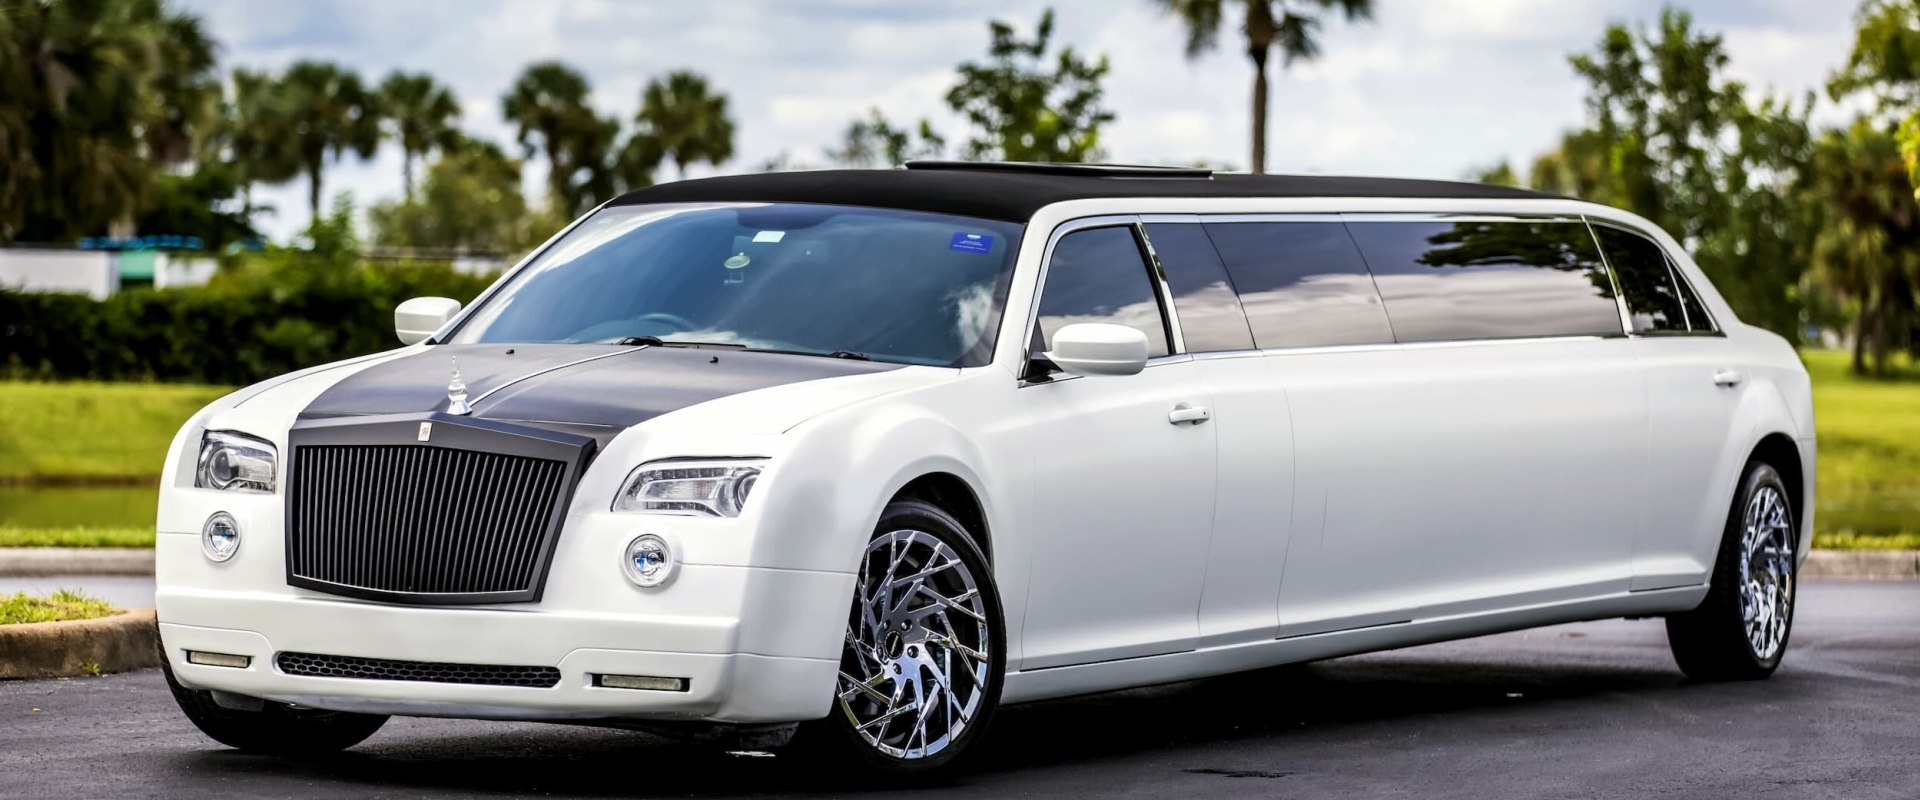 How Much Does it Cost to Rent a Limousine in India?